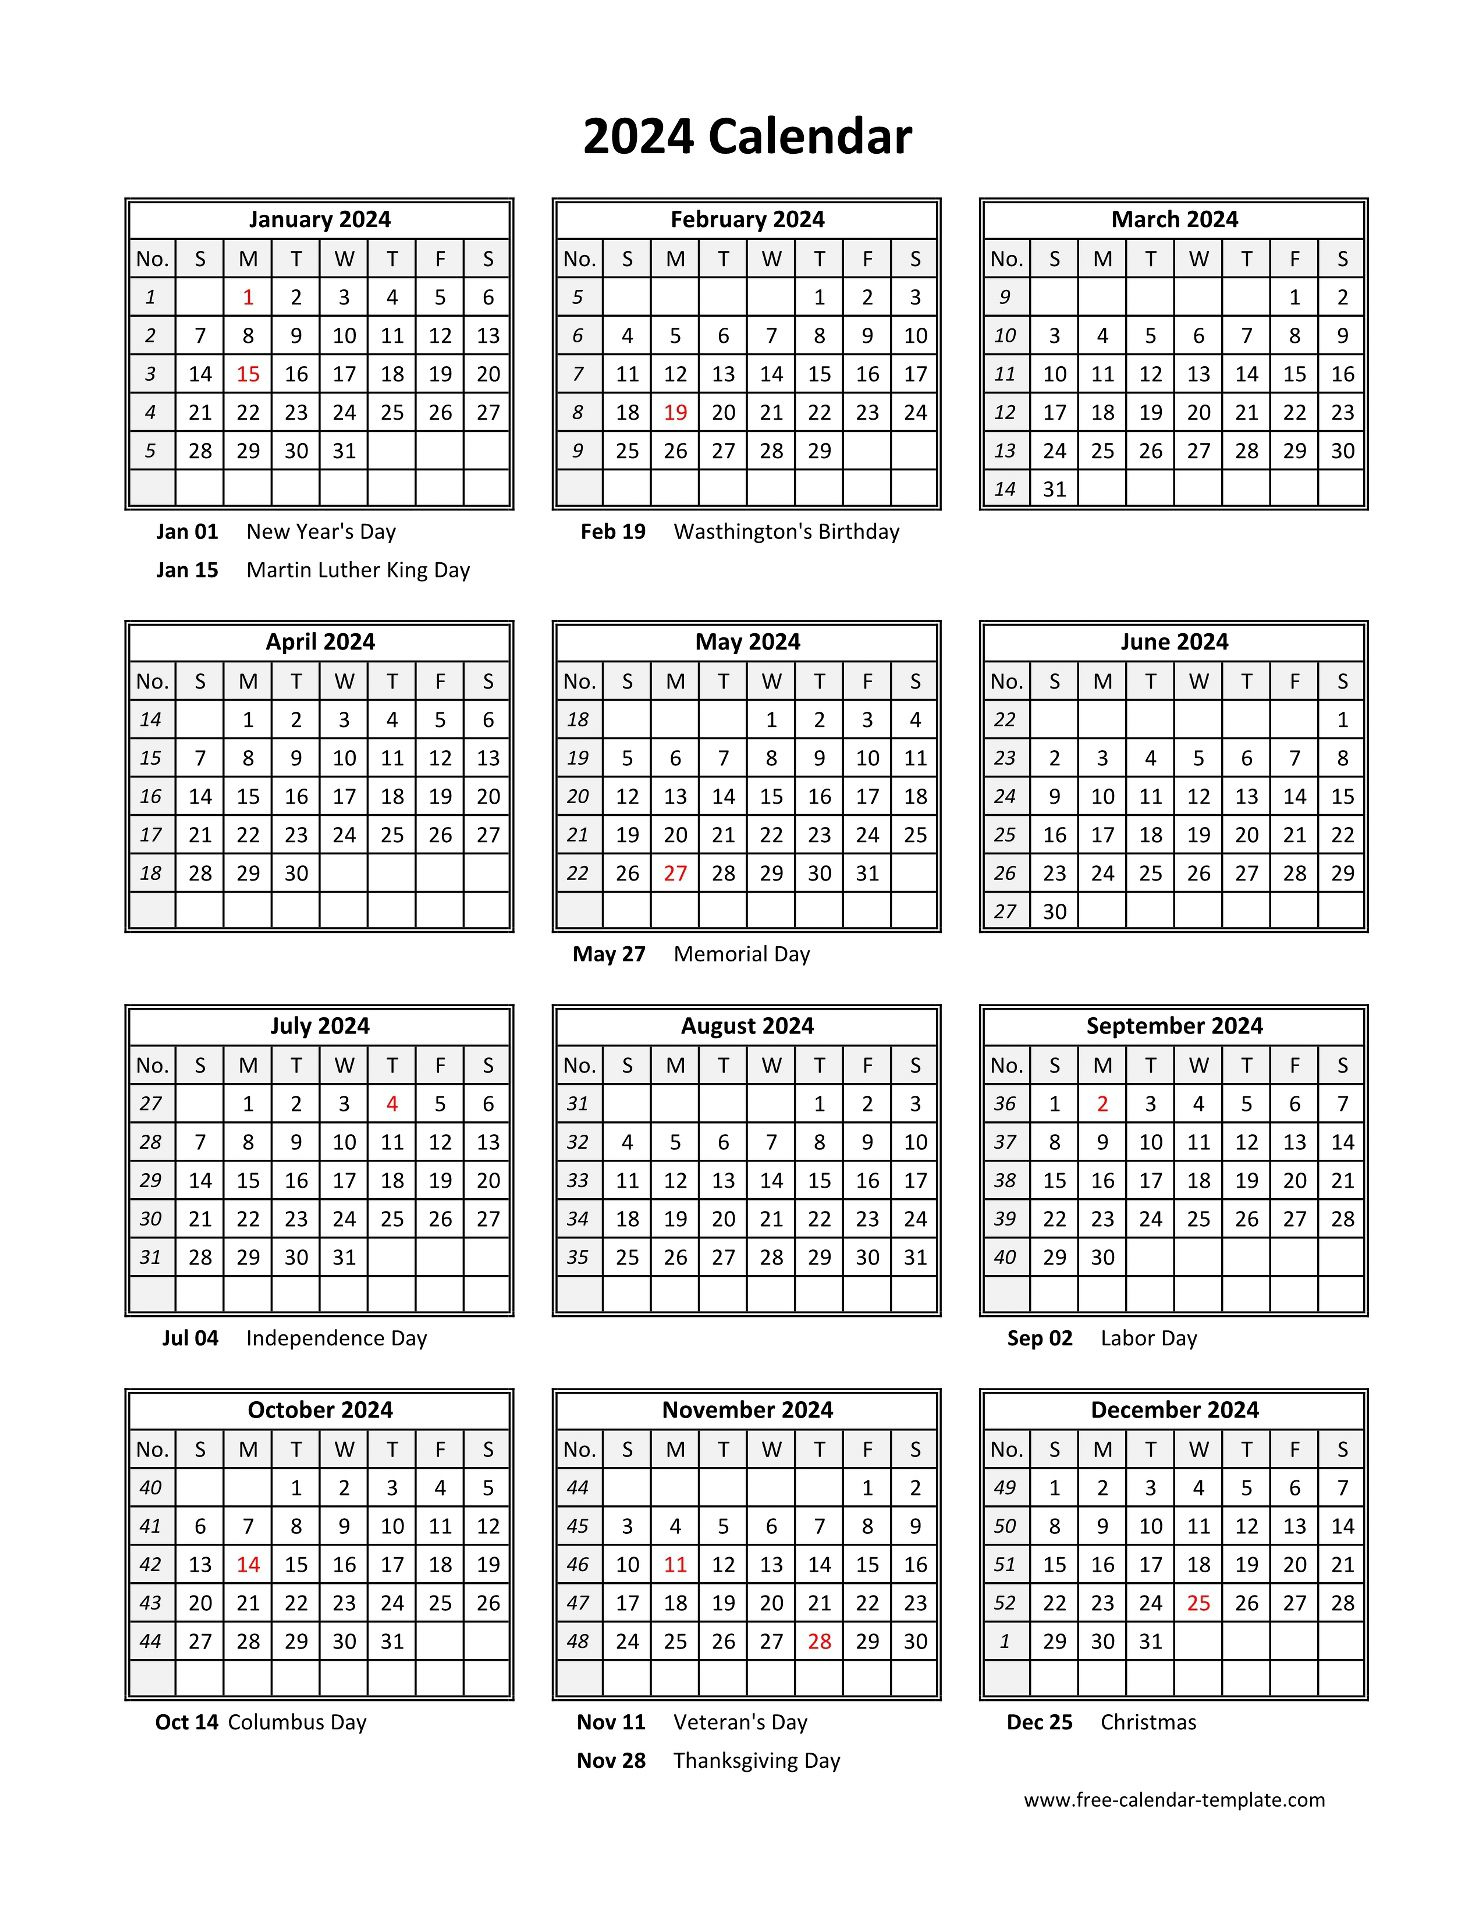 Yearly Printable Calendar 2024 With Holidays | Free-Calendar | Yearly Printable Calendar 2024